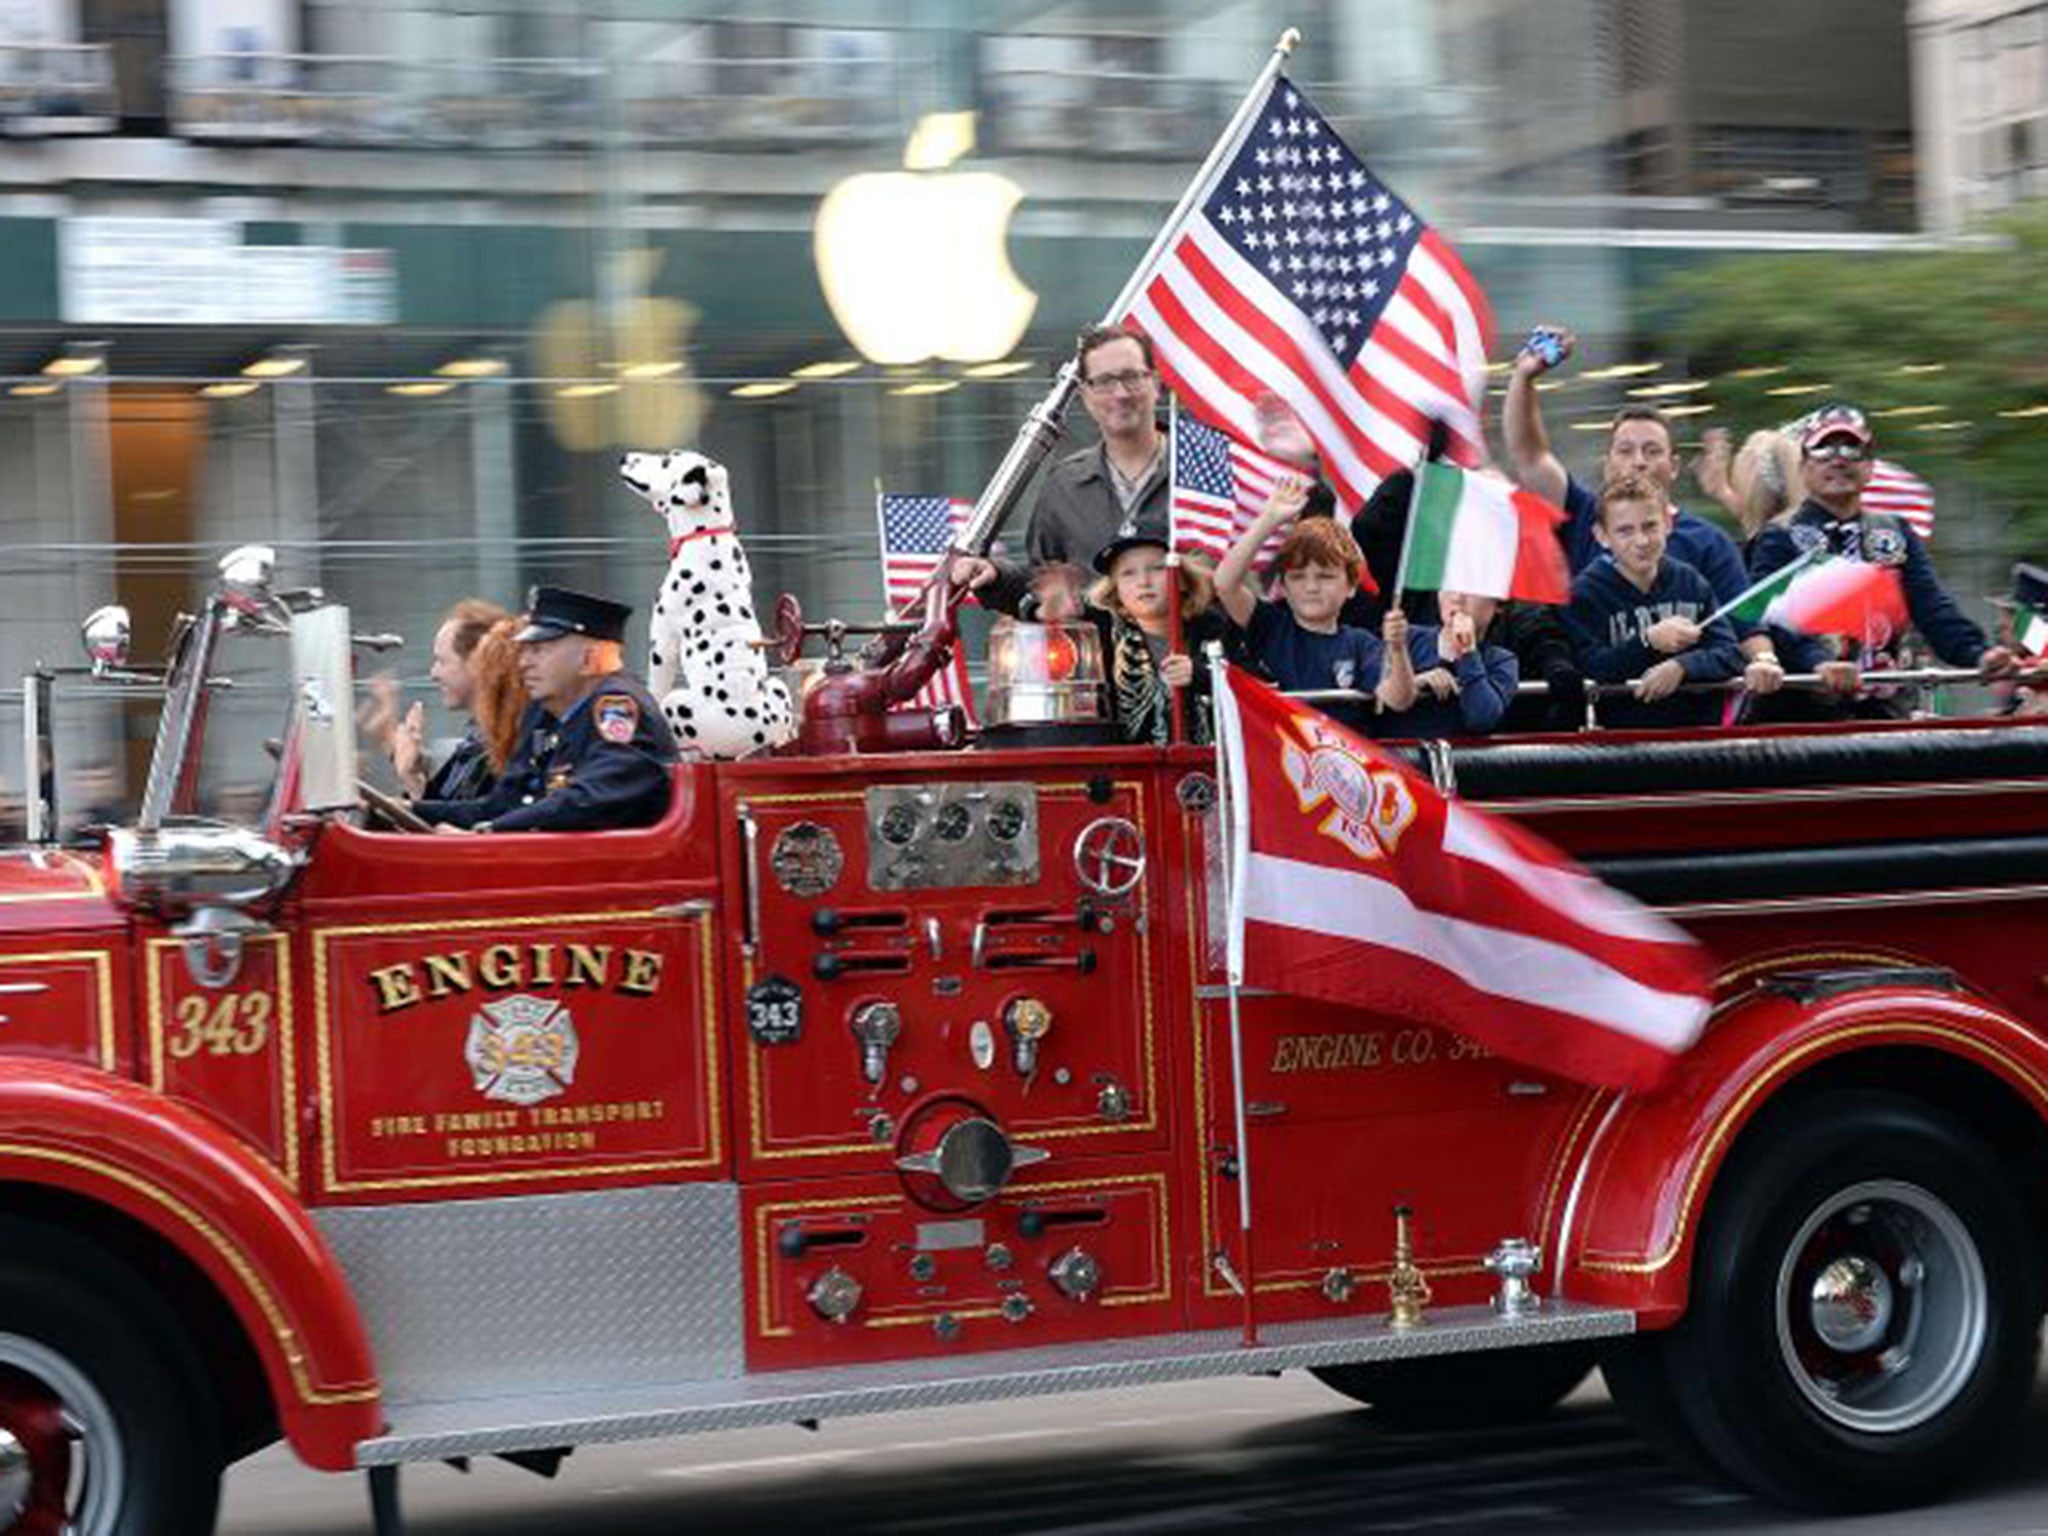 The annual Columbus Day Parade proceeds down New York City's Fifth Avenue